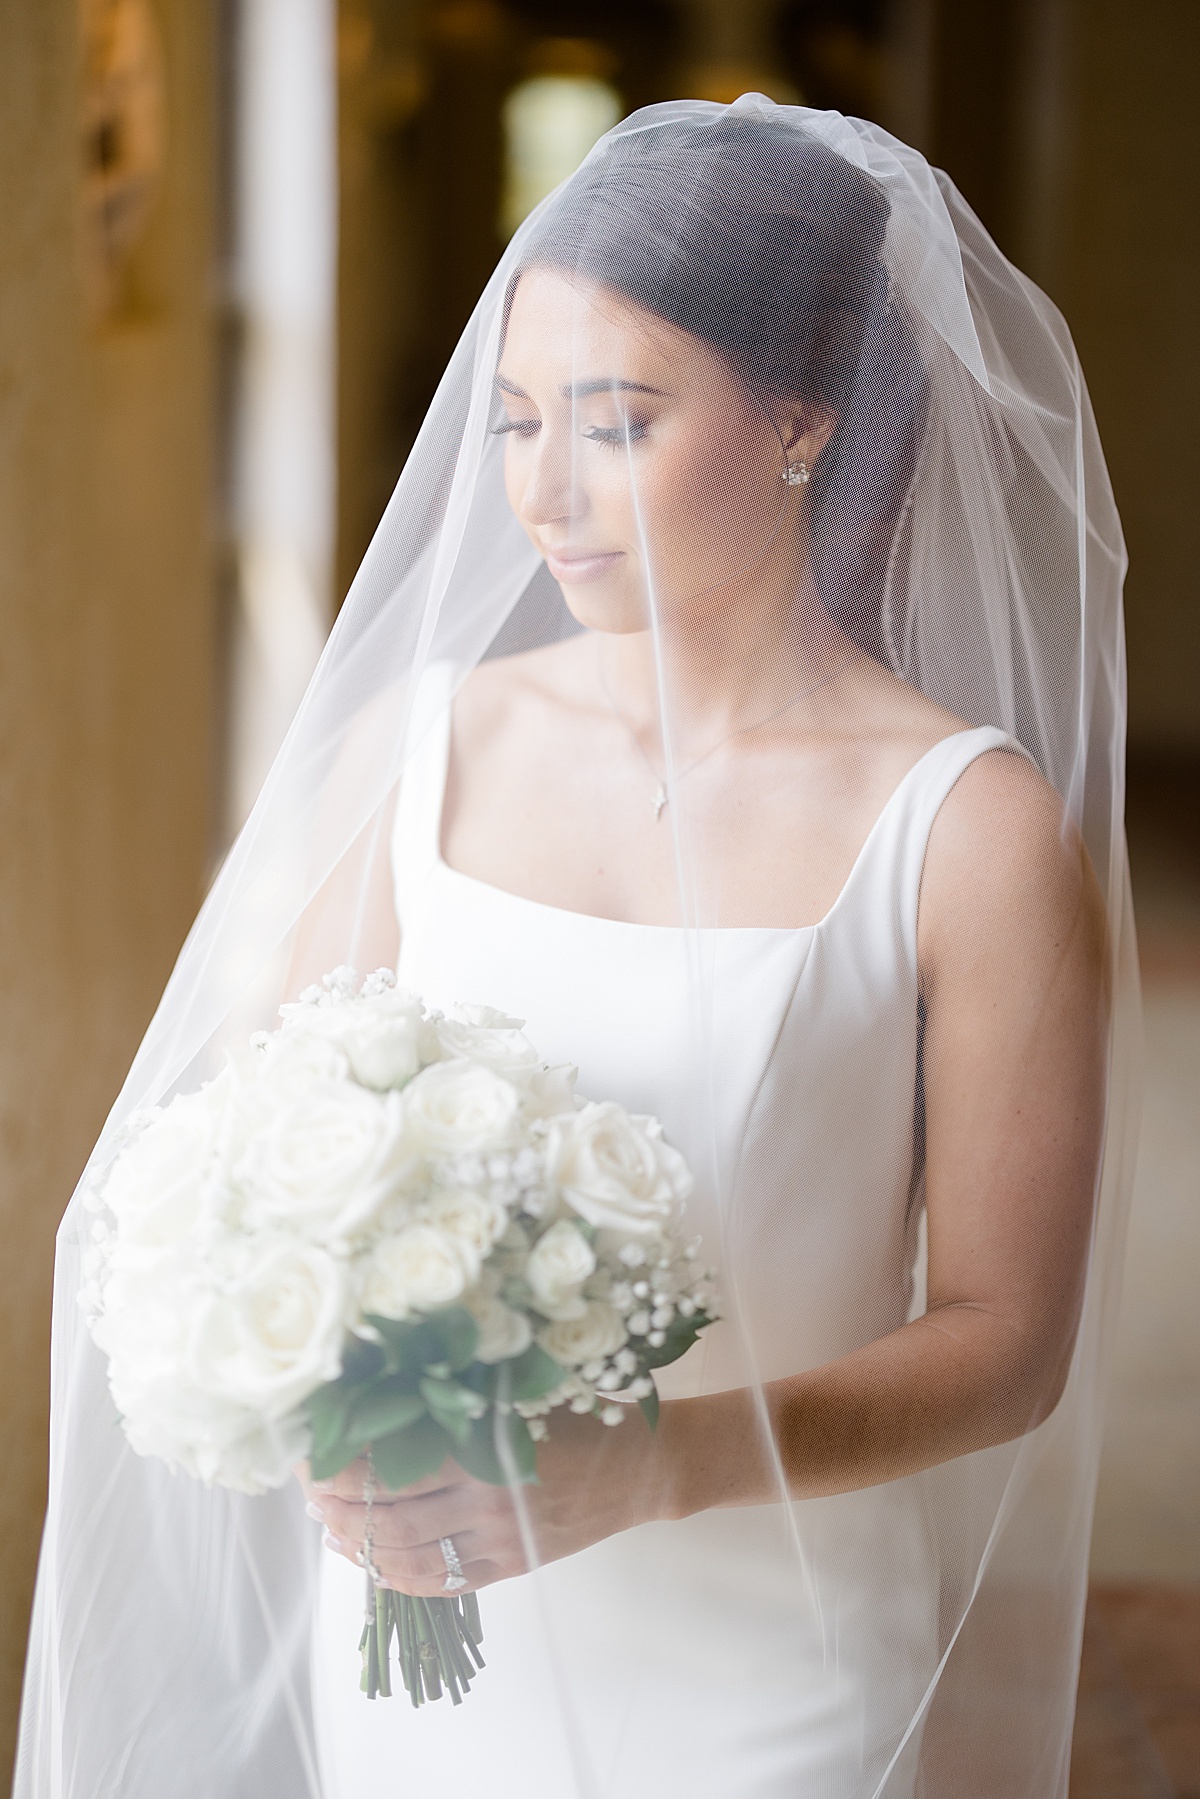 bride poses in veil with white rose bouquet before heartfelt Catholic ceremony